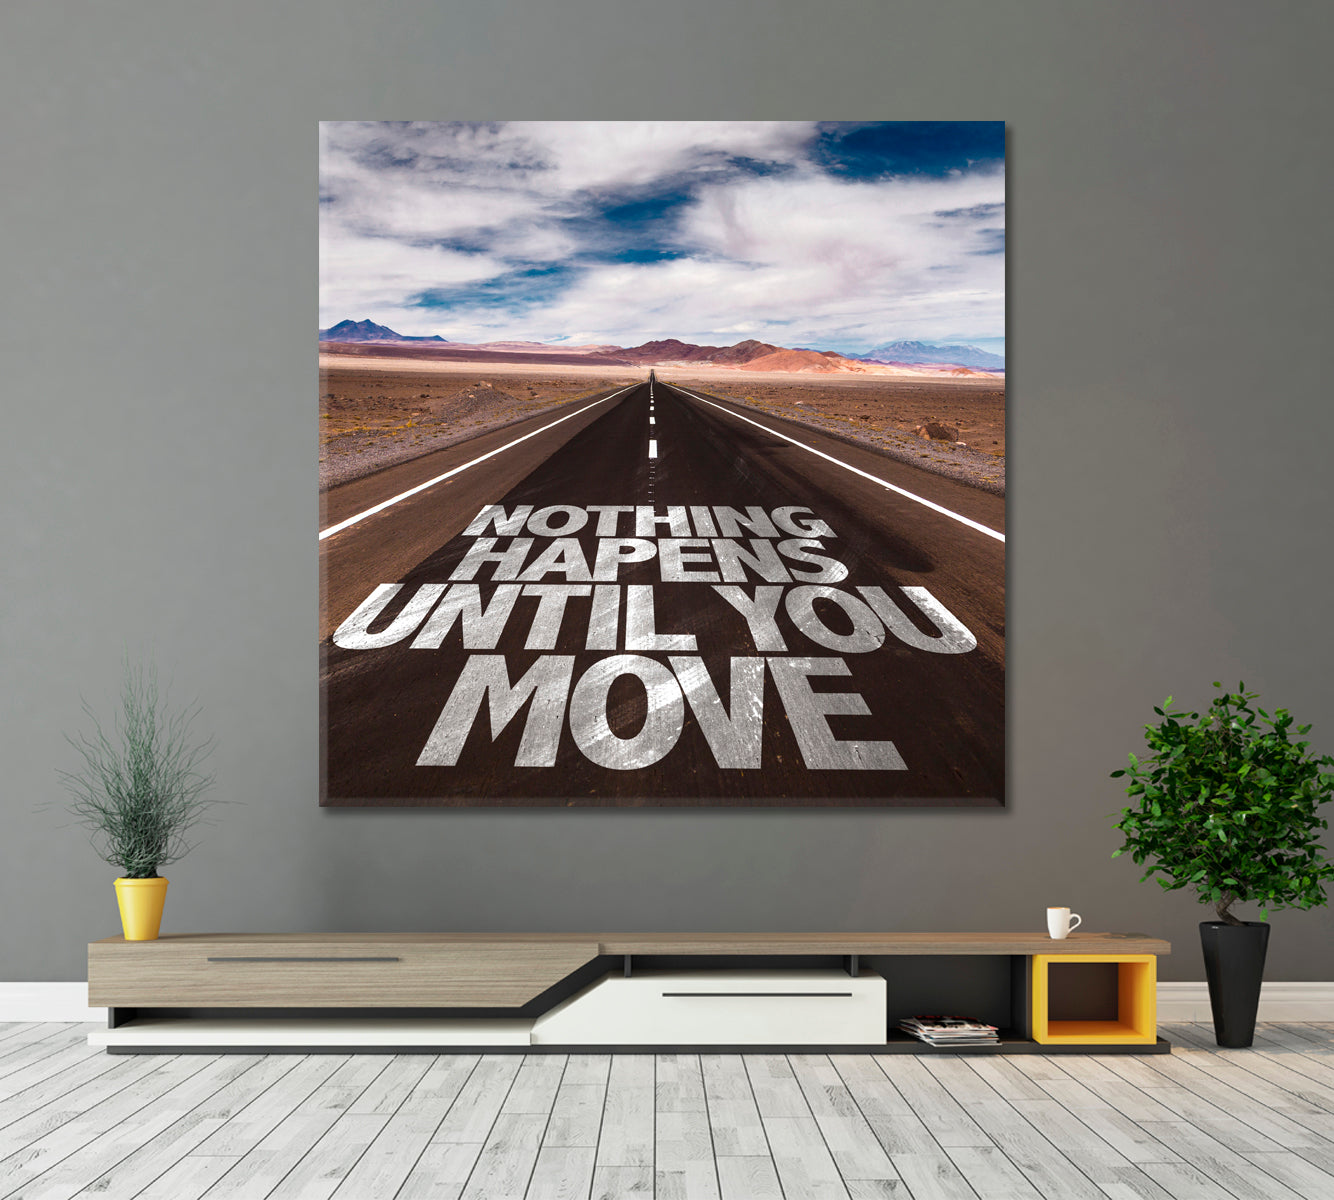 NOTHING HAPPENS UNTIL YOU MOVE Office Wall Decor Desert Road Motivation Poster - Square Panel Office Wall Art Canvas Print Artesty 1 Panel 12"x12" 